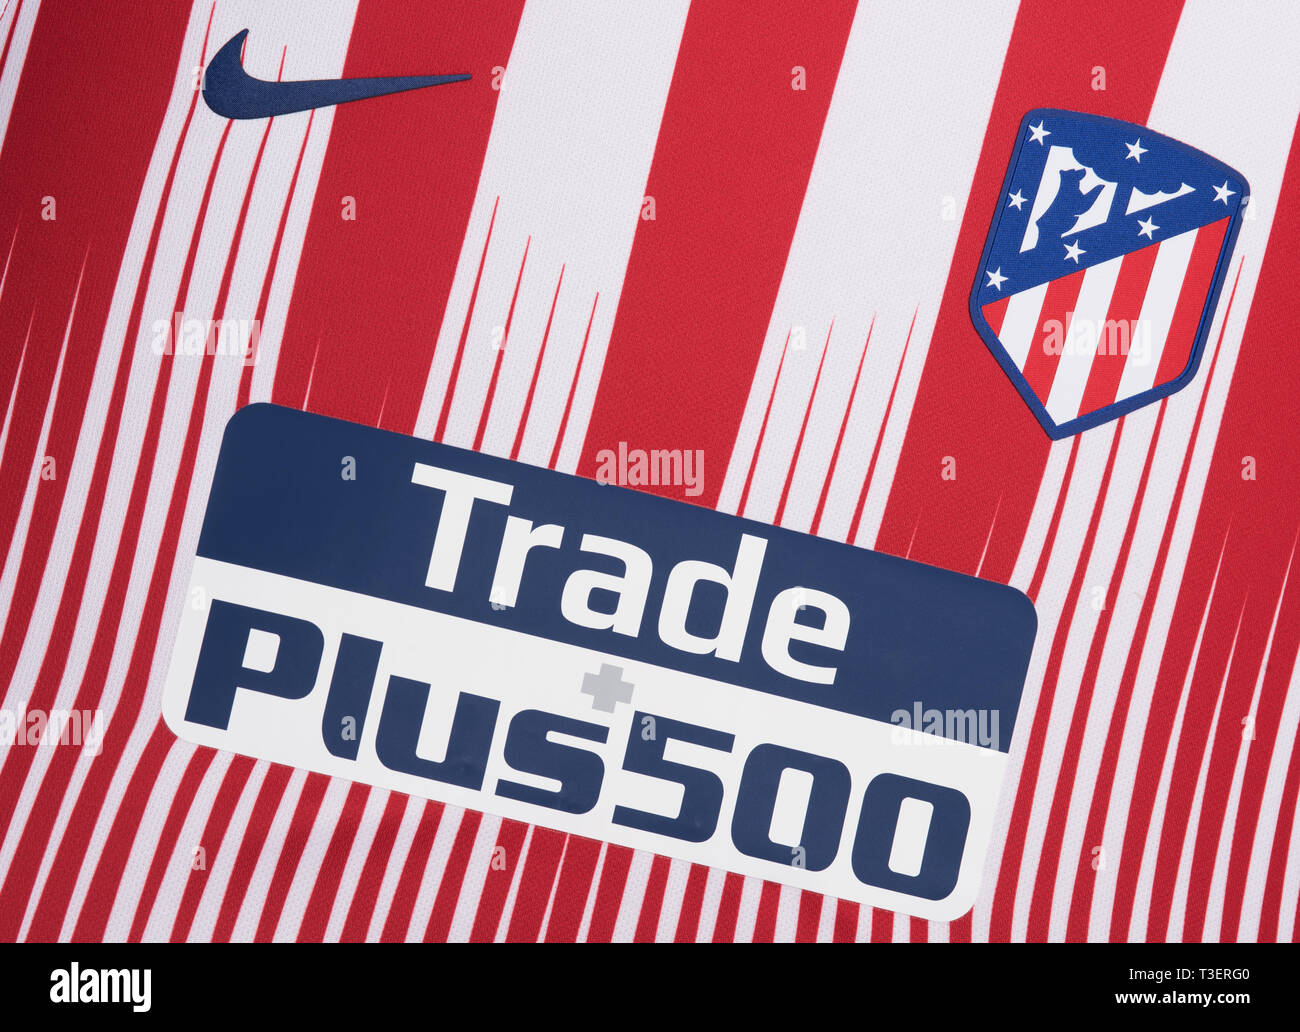 Atletico Madrid Logo High Resolution Stock Photography And Images Alamy